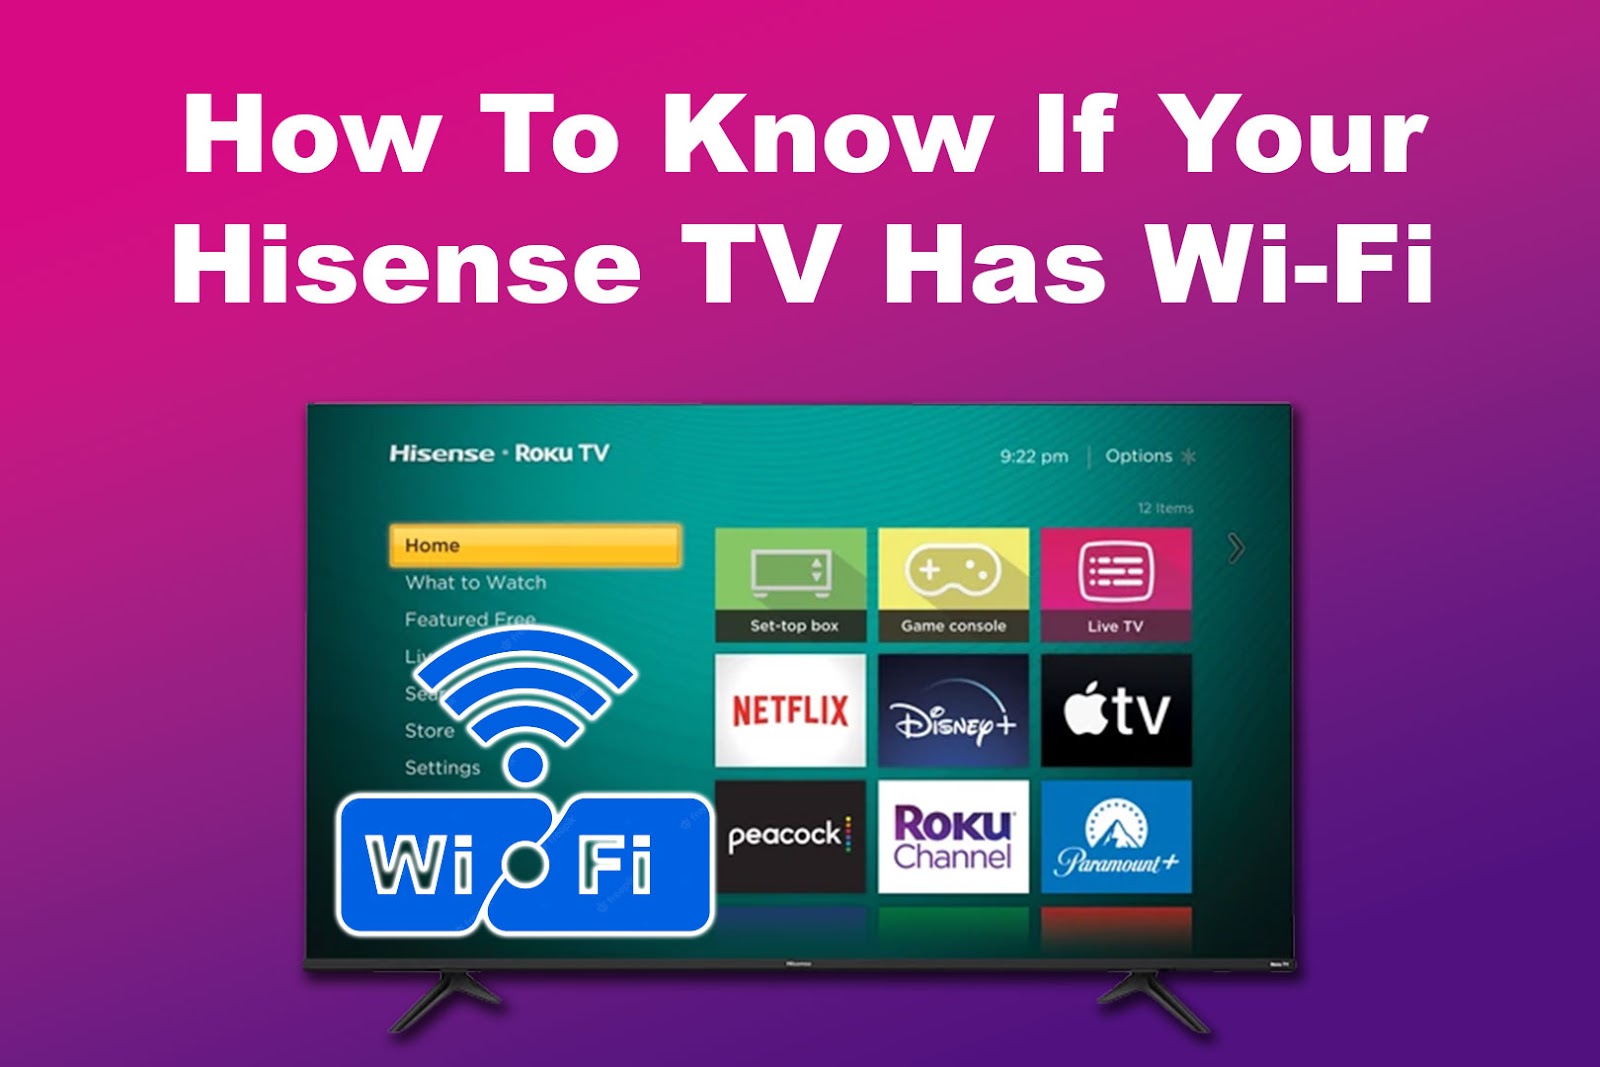 How To Know If Your Hisense TV Has Wi-Fi